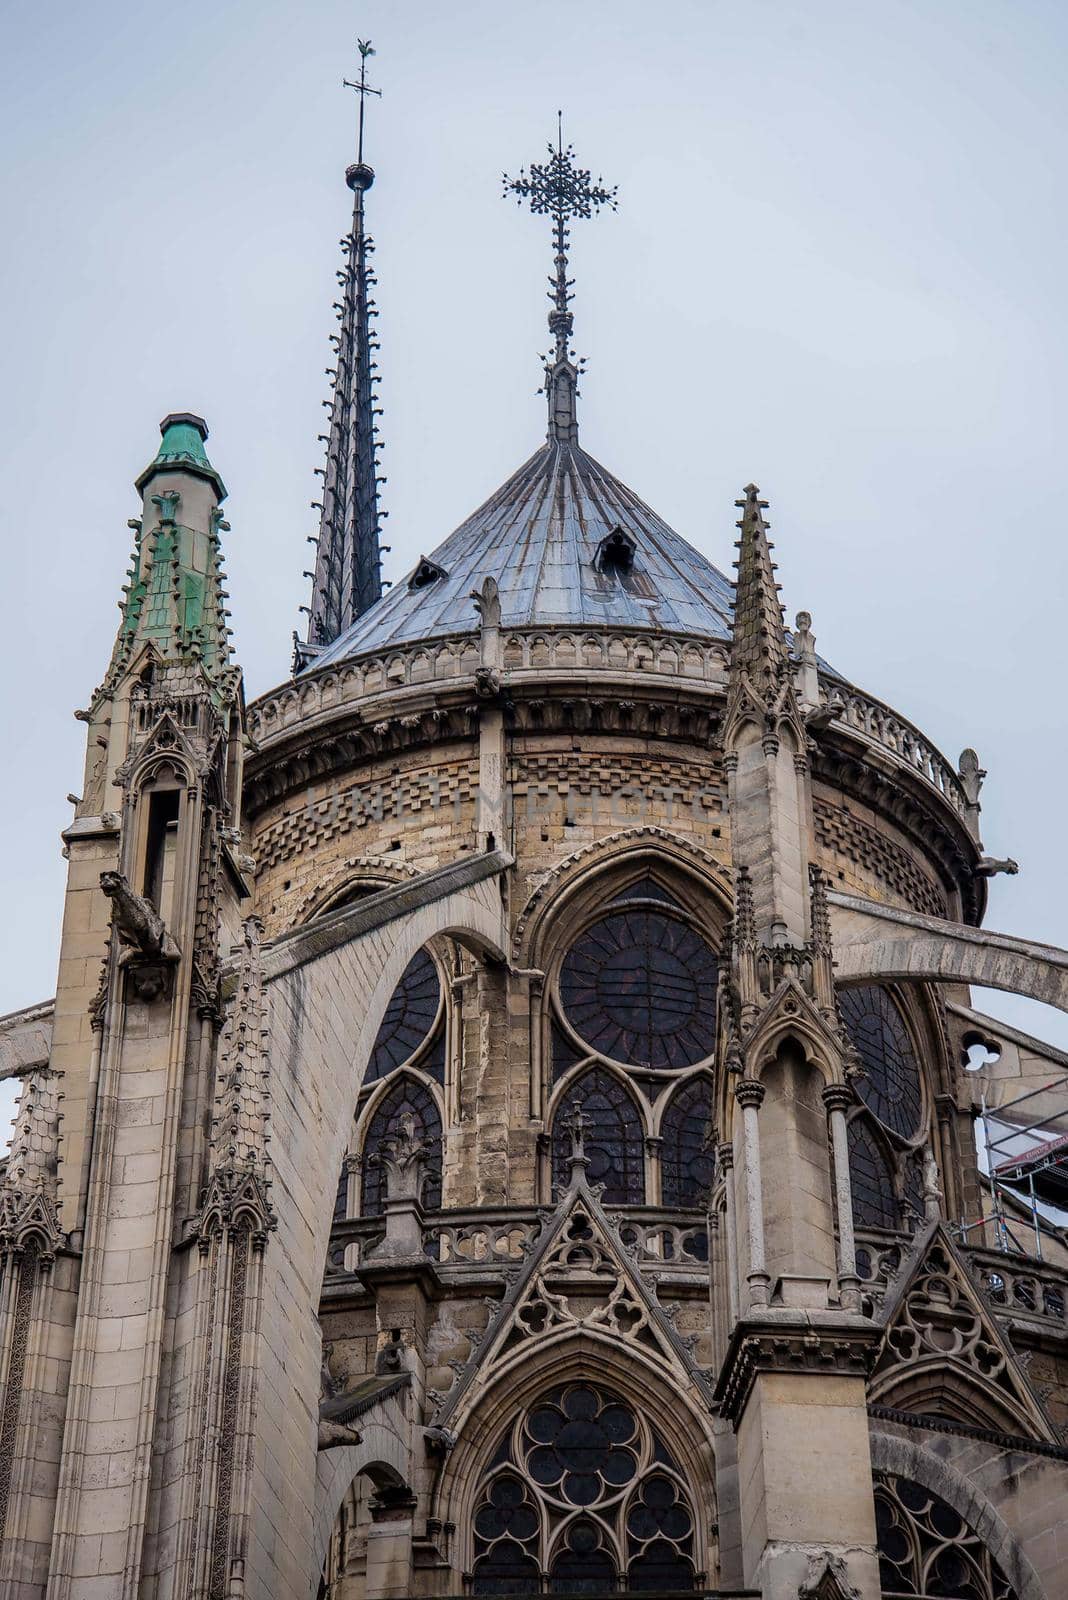 Detail close up view of the French Gothic architecture of the Notre Dame de Paris. Exterior view by jyurinko